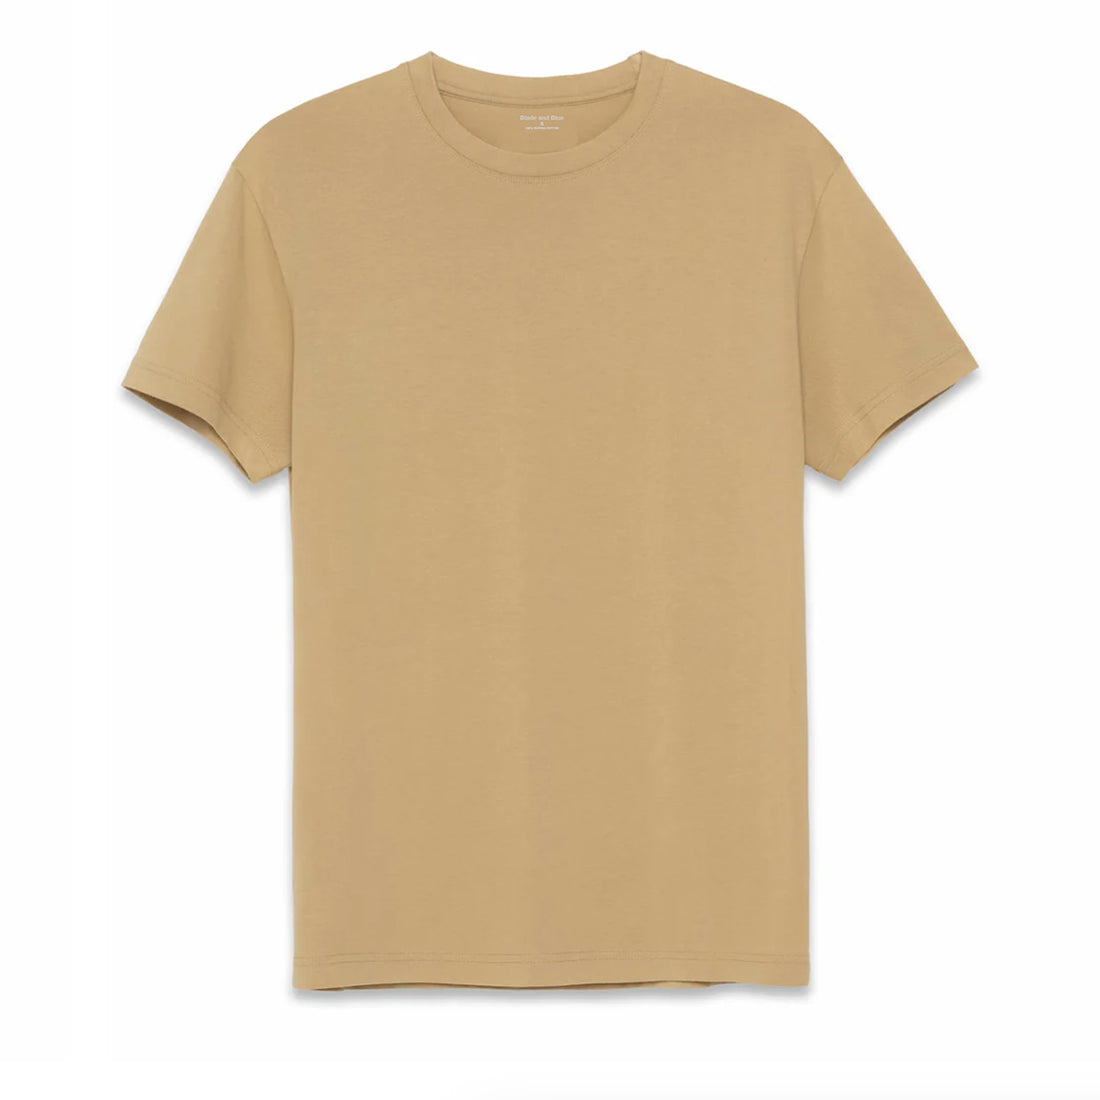 American Grown Supima 100% Cotton Tee in Pale Gold